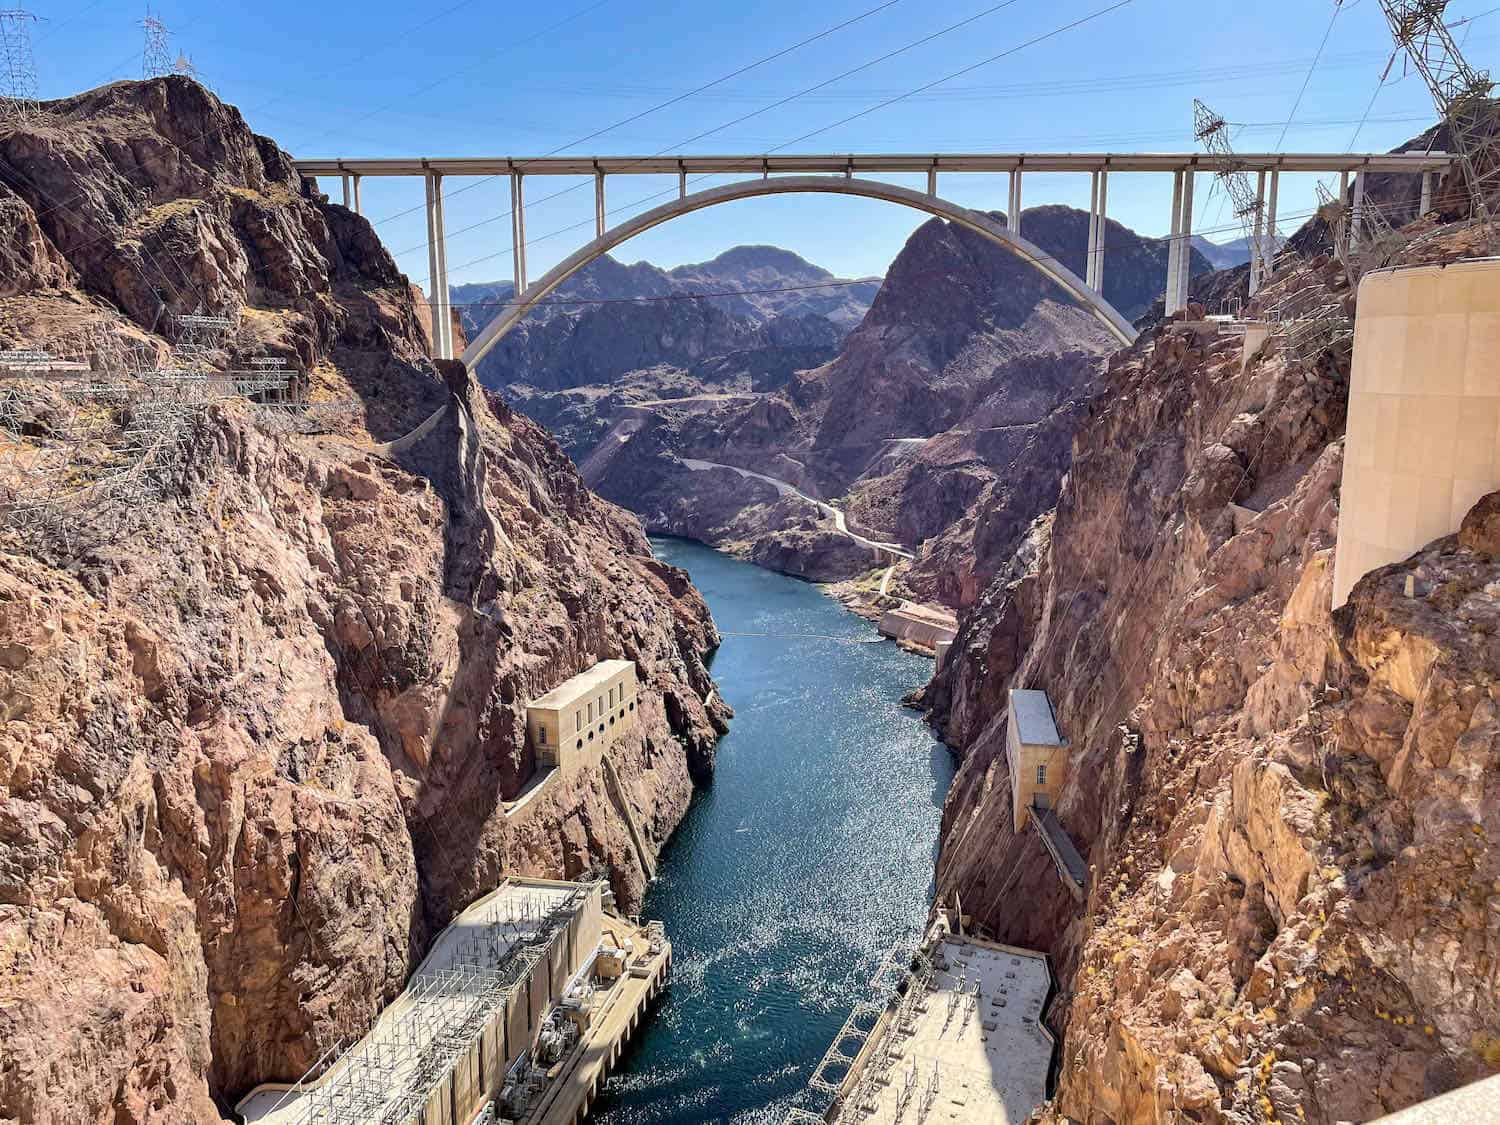 High bridge surrounded by red rock landscape at Hoover Dam. This is an easy day trip from Las Vegas.